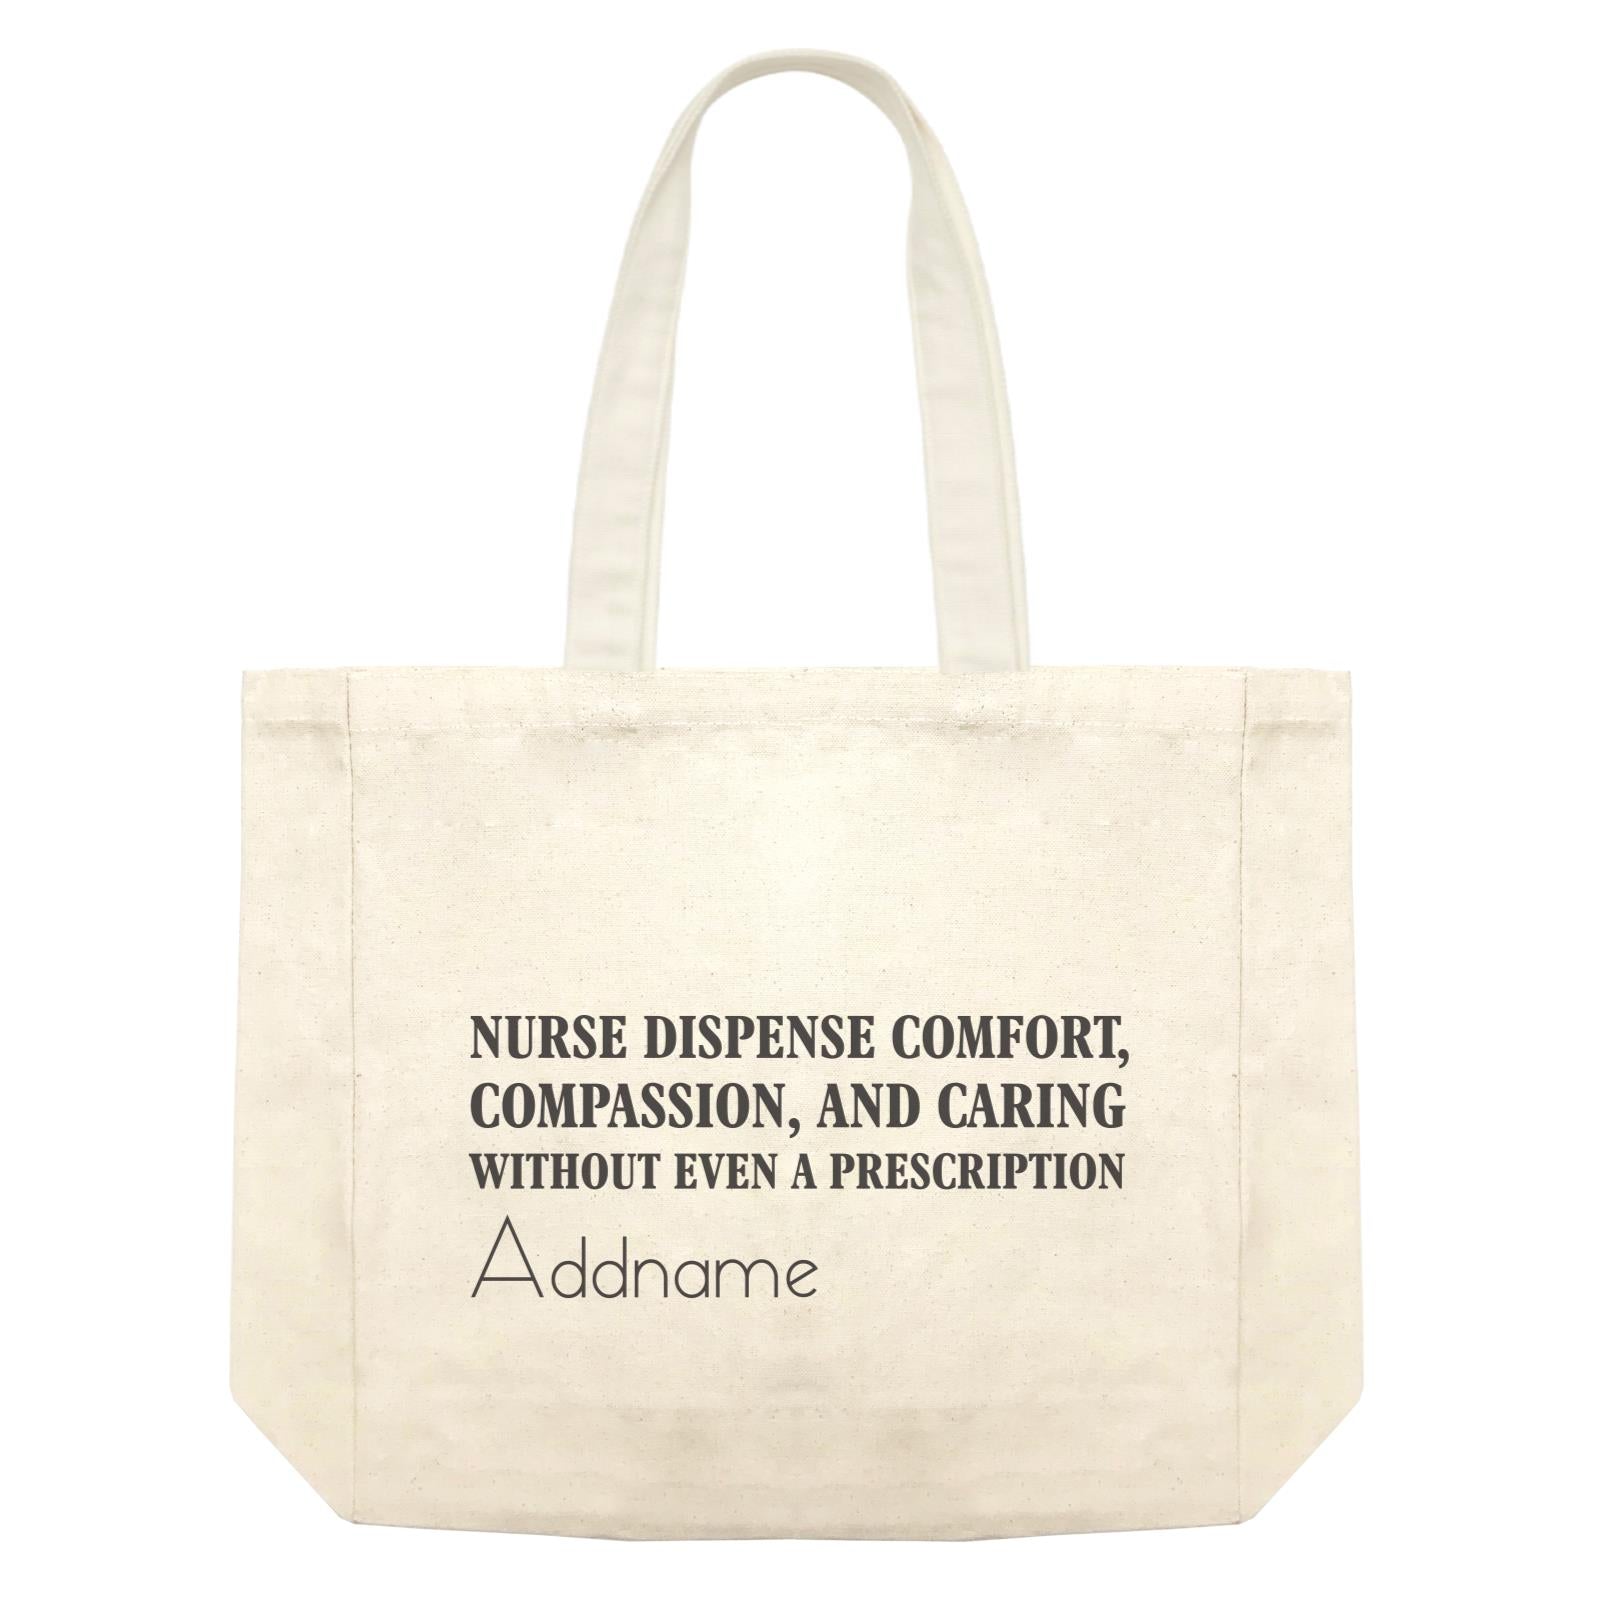 Nurse Dispense Comfort, Compassion, And Caring Without Even A Prescription Shopping Bag